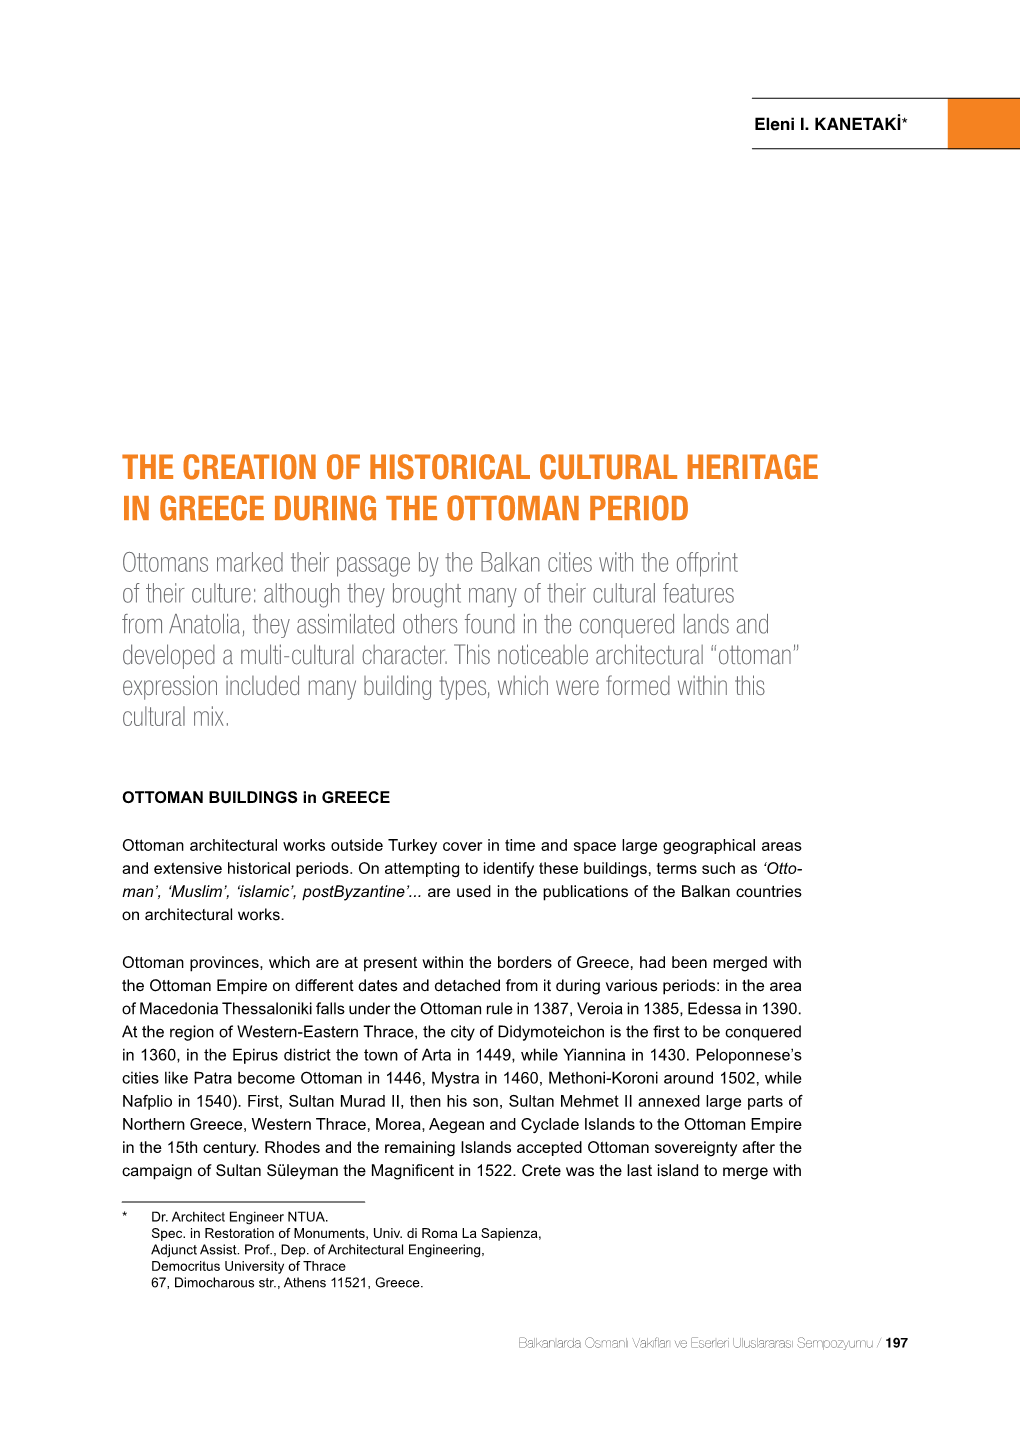 The Creation of Historical Cultural Heritage In